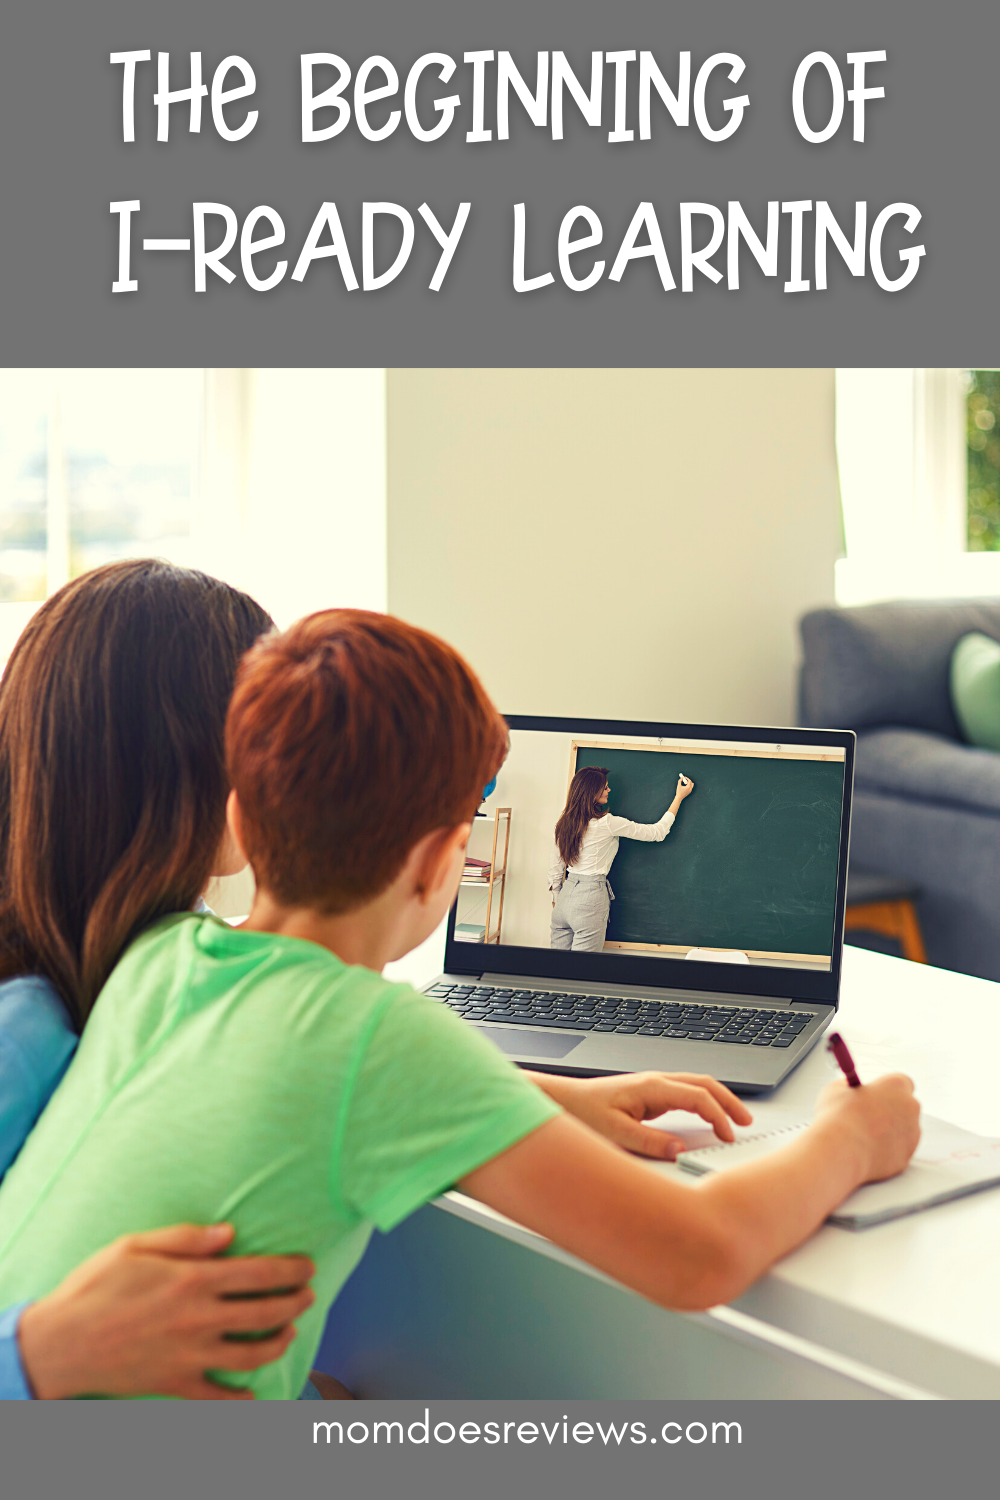 The Beginning of i-Ready Learning